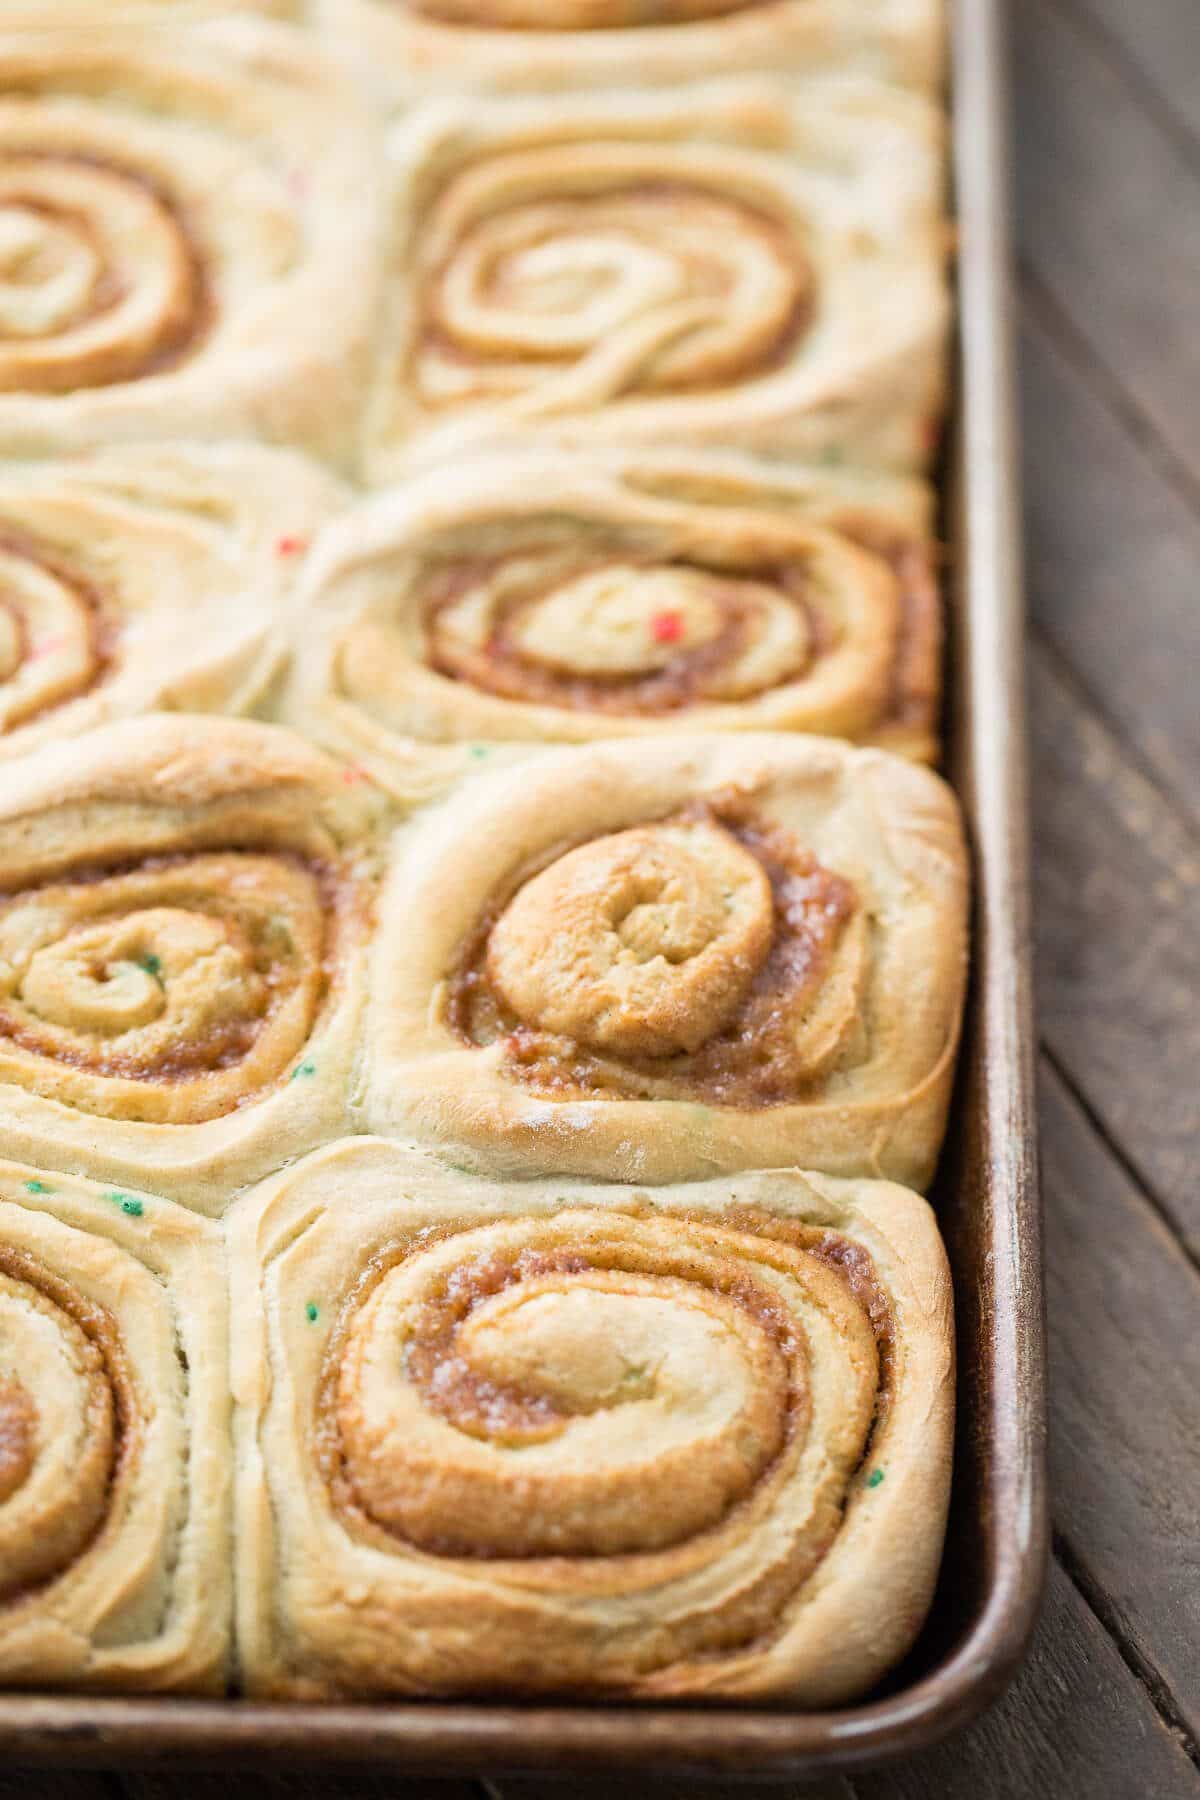 How can cinnamon rolls be better? When they are cake mix cinnamon rolls!